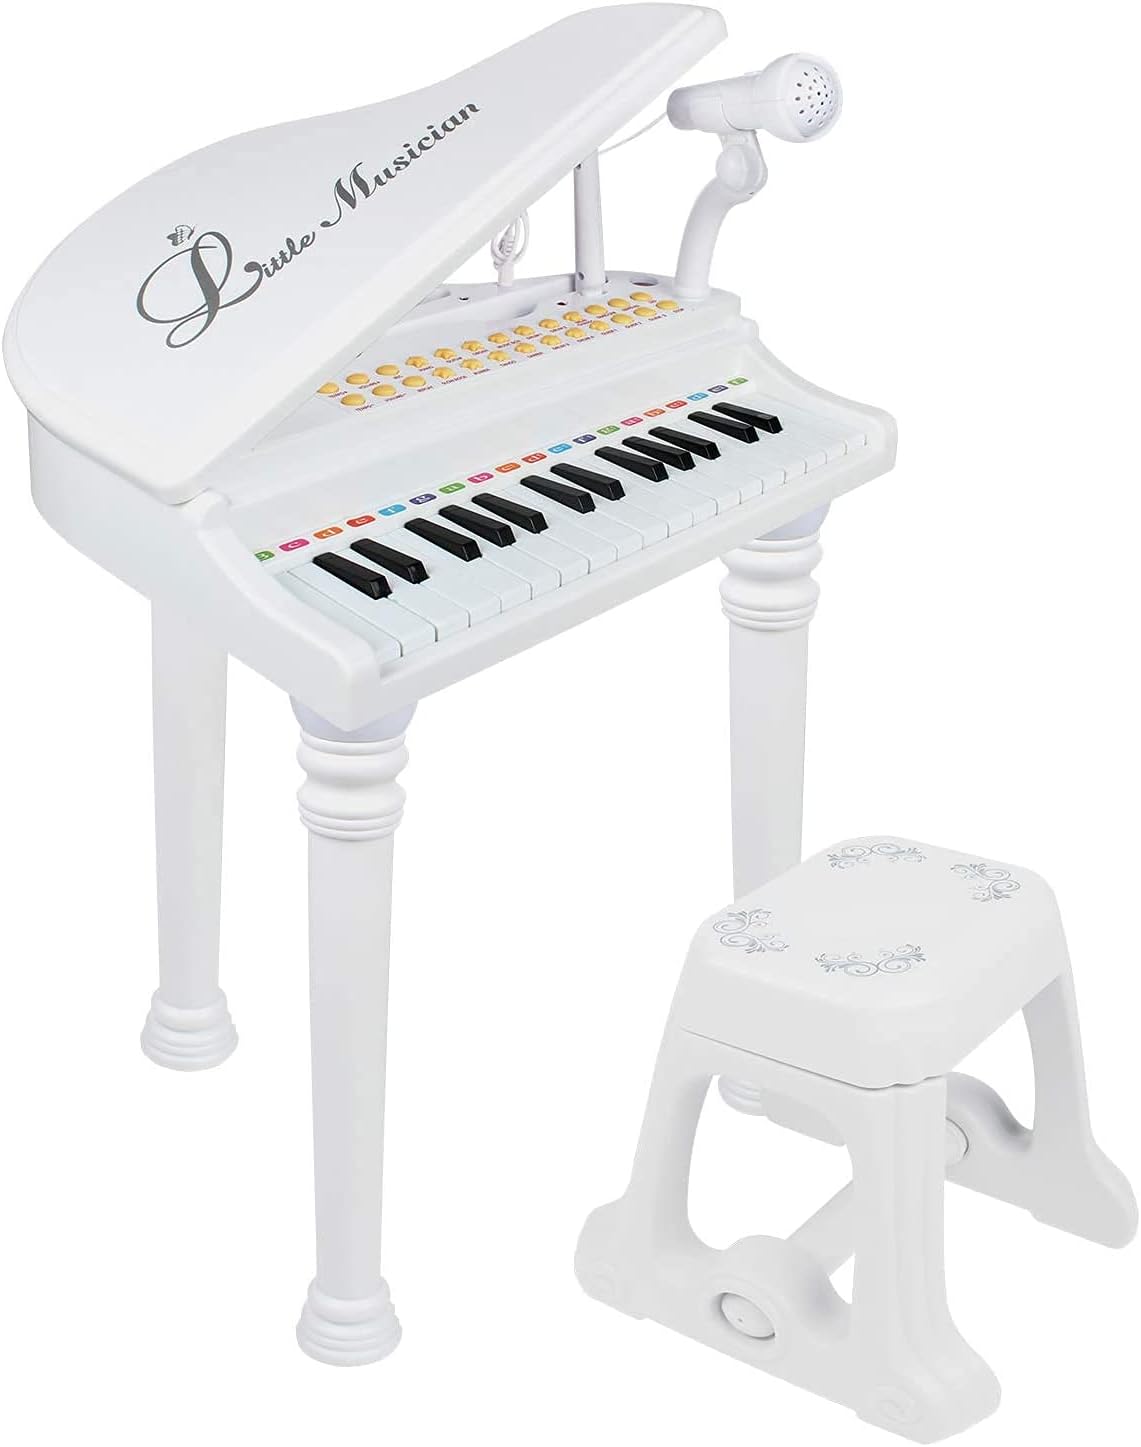 Love&Mini Piano Toy Keyboard for Kids Birthday Gift with Microphone